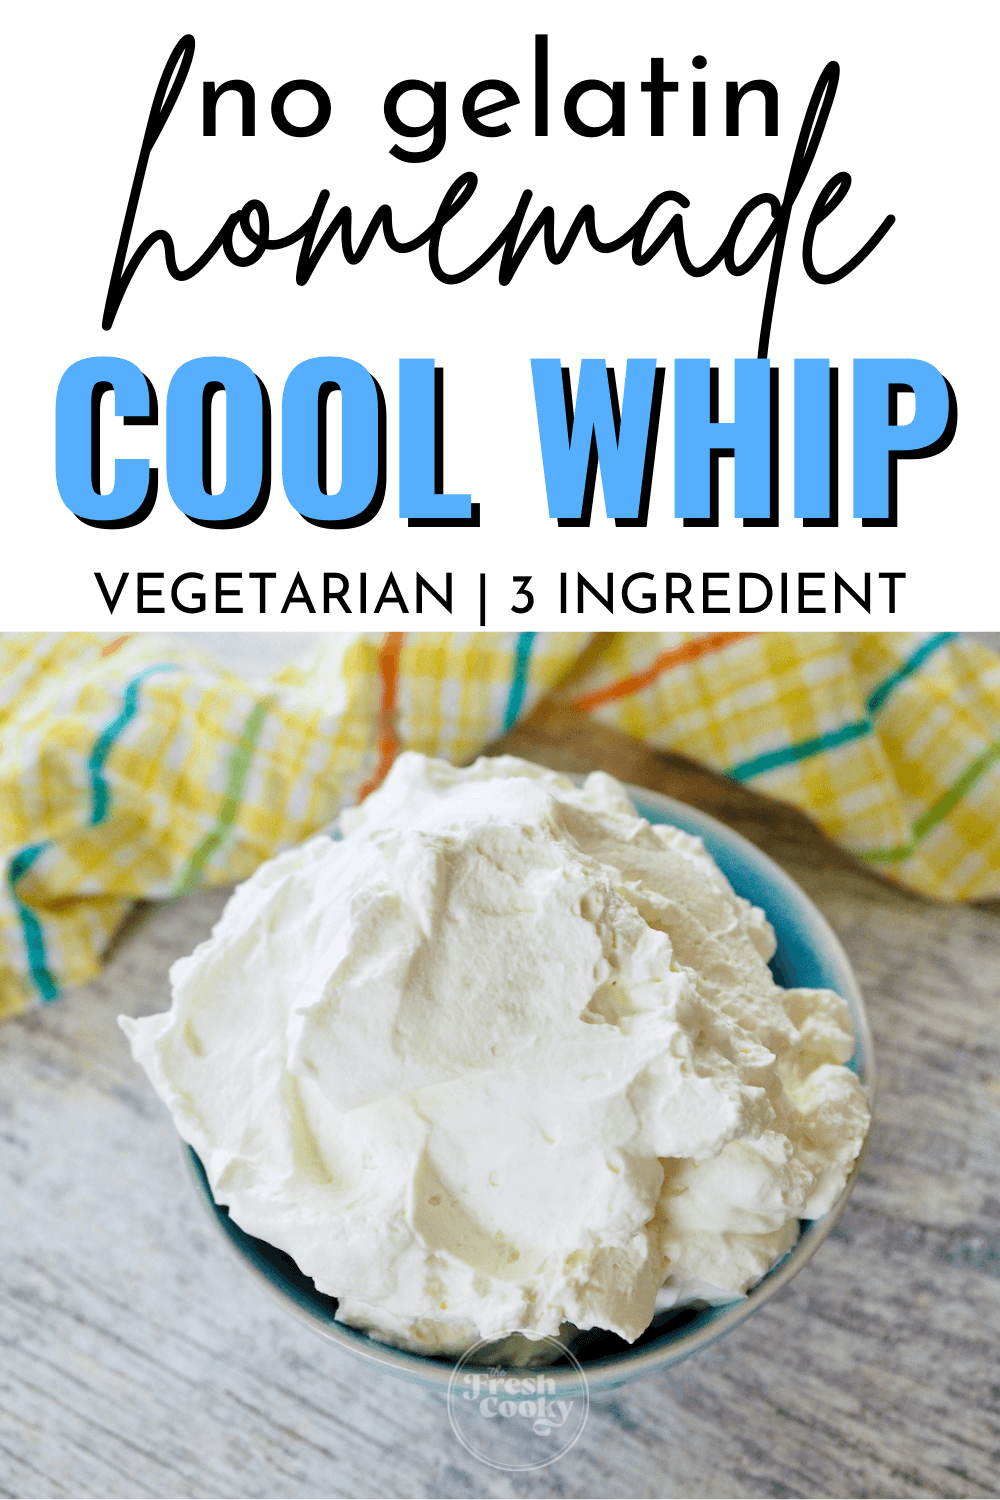 https://www.thefreshcooky.com/wp-content/uploads/2022/04/Homemade-Cool-Whip-3.png